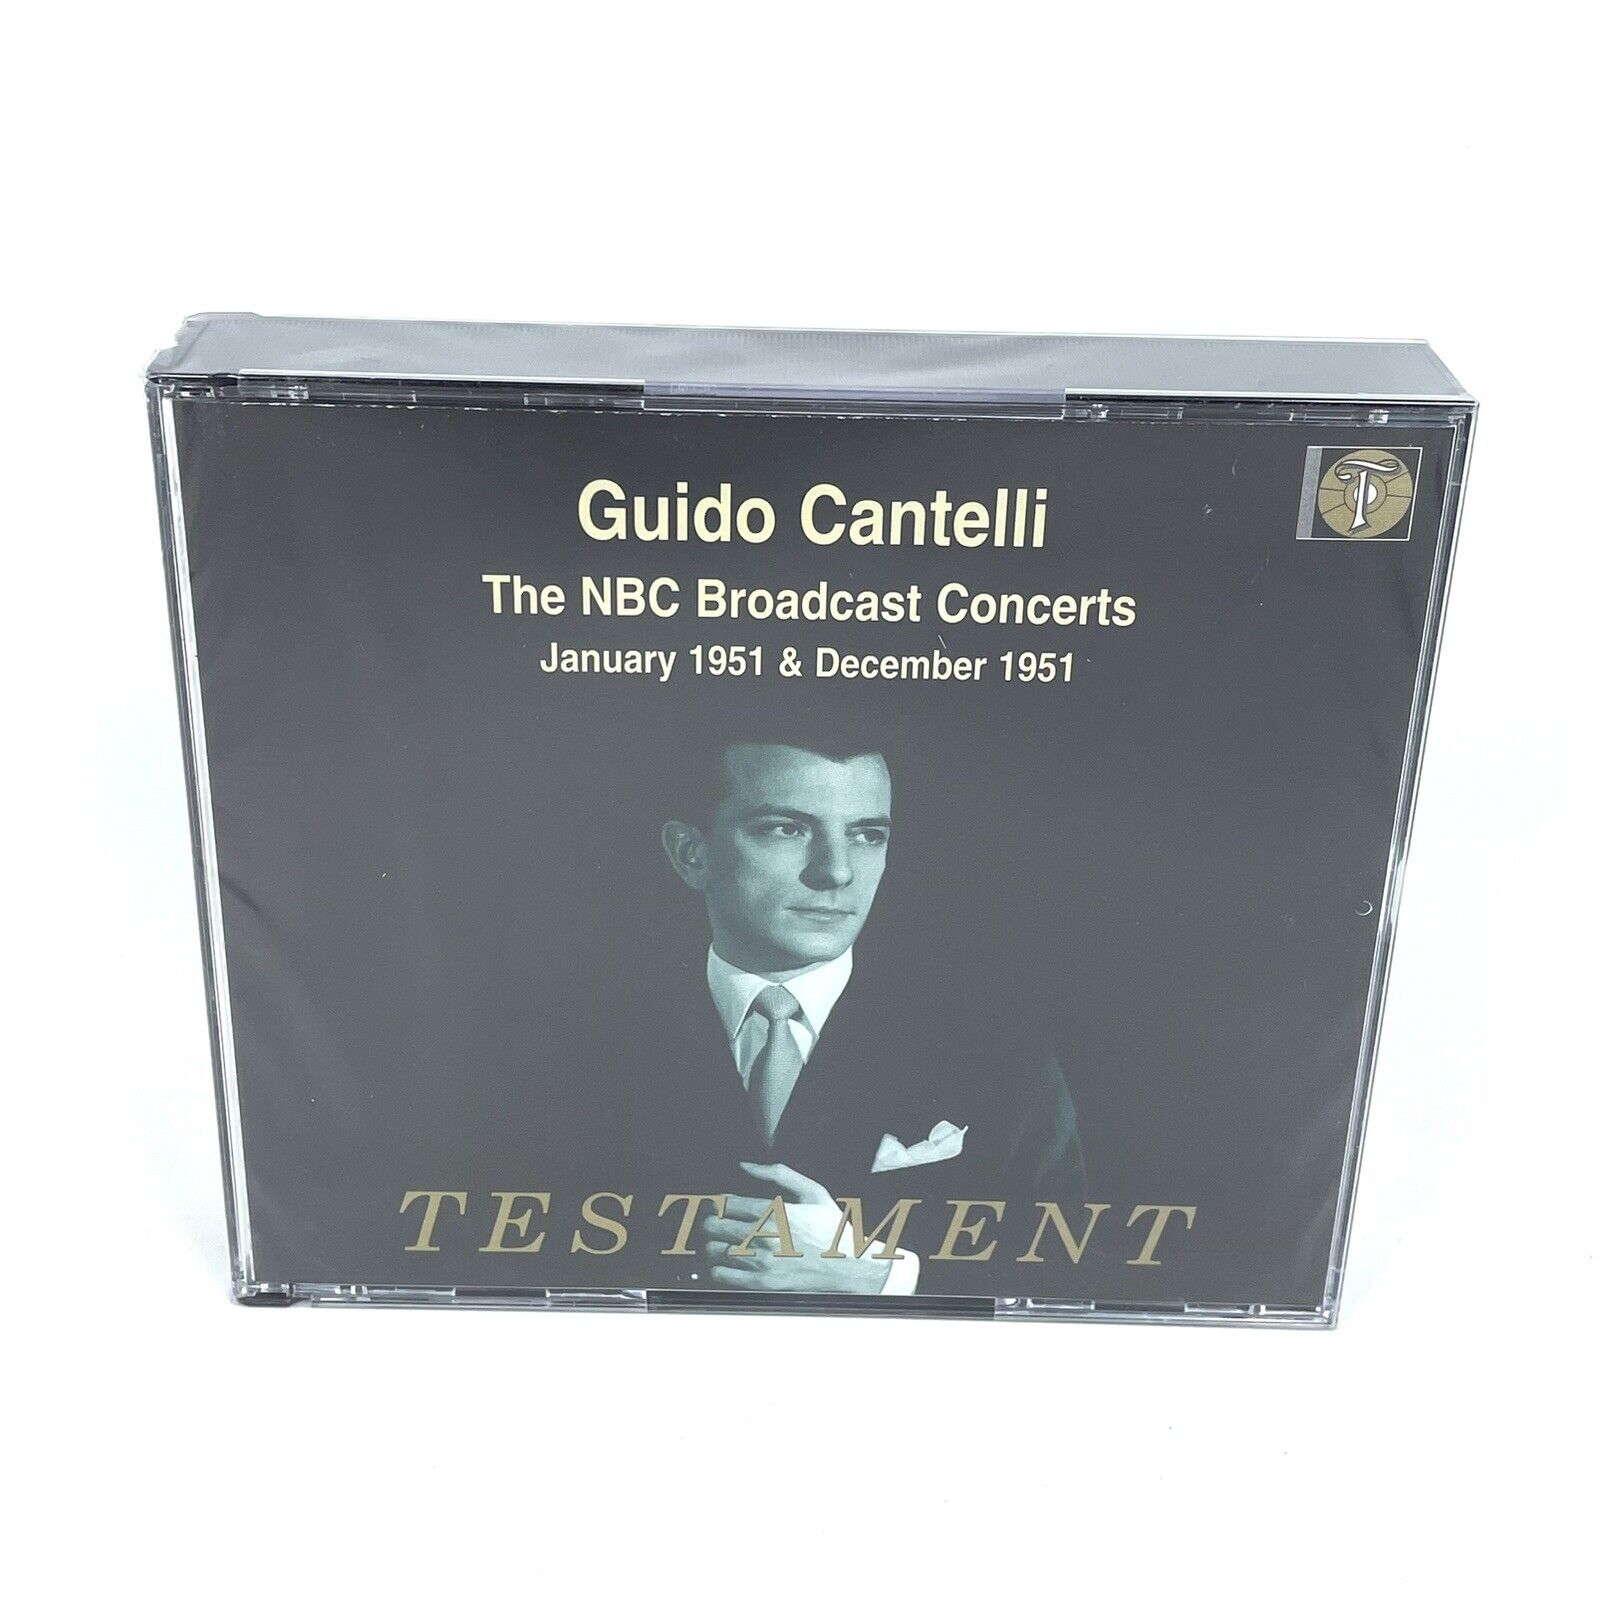 Guido Cantelli THE NBC BROADCAST CONCERTS, JANUARY 1951 & DECEMBER 1951 NEW CD